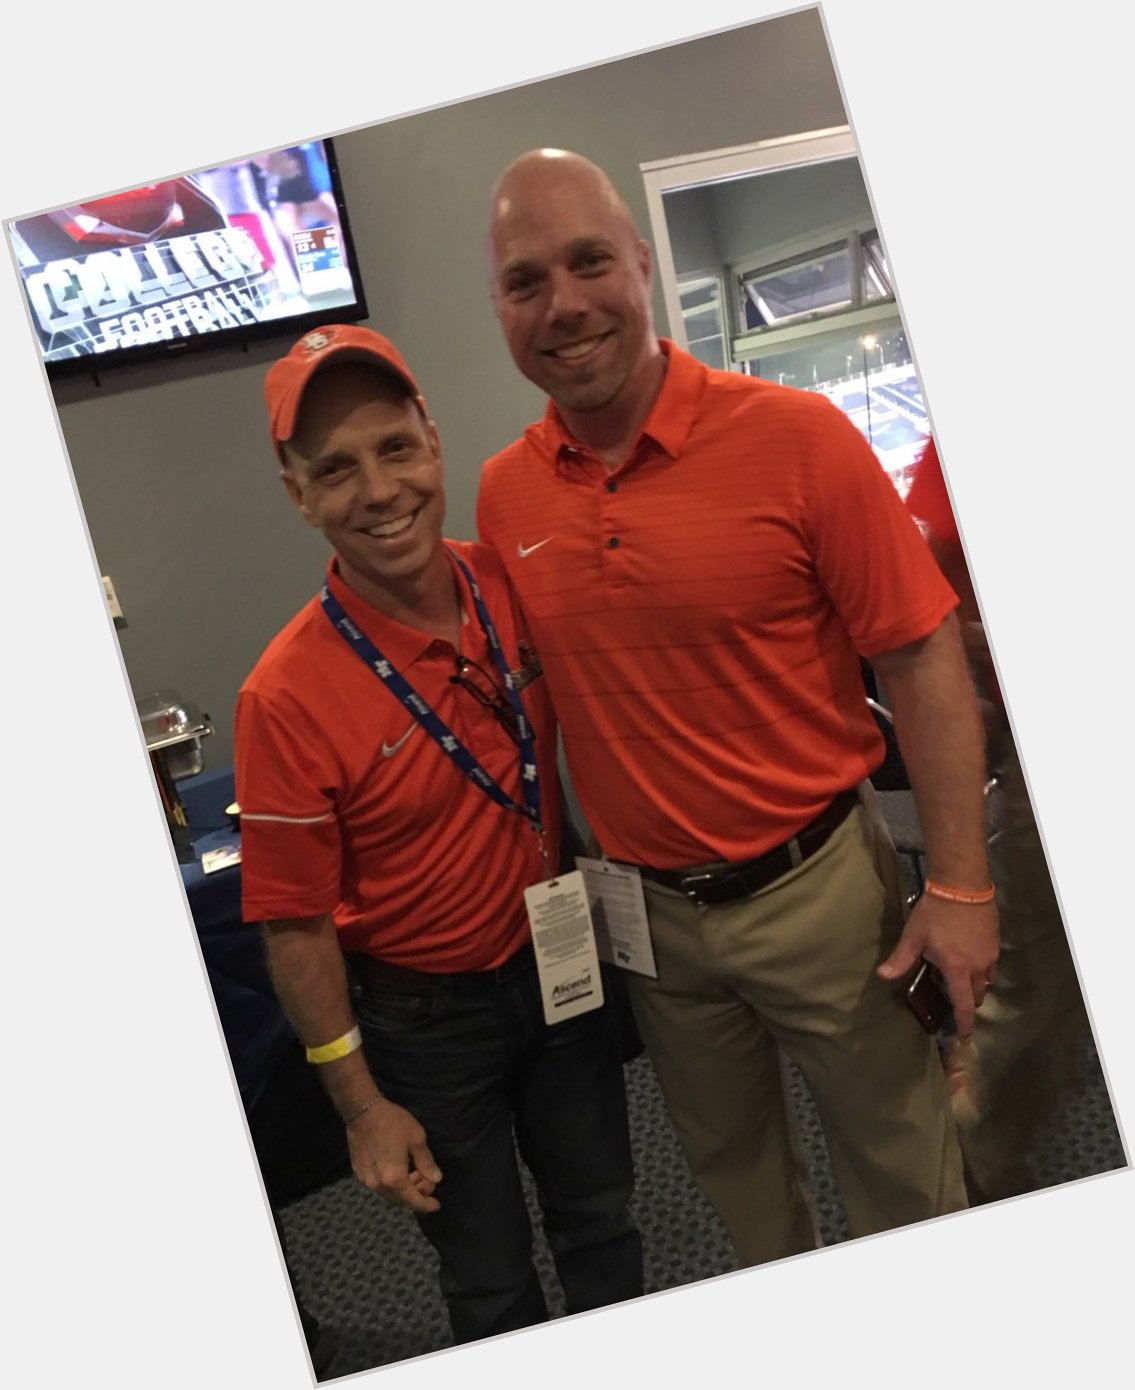 Happy Falcon Birthday to Bowling Green legend Scott Hamilton who I m honored to share the day with! 